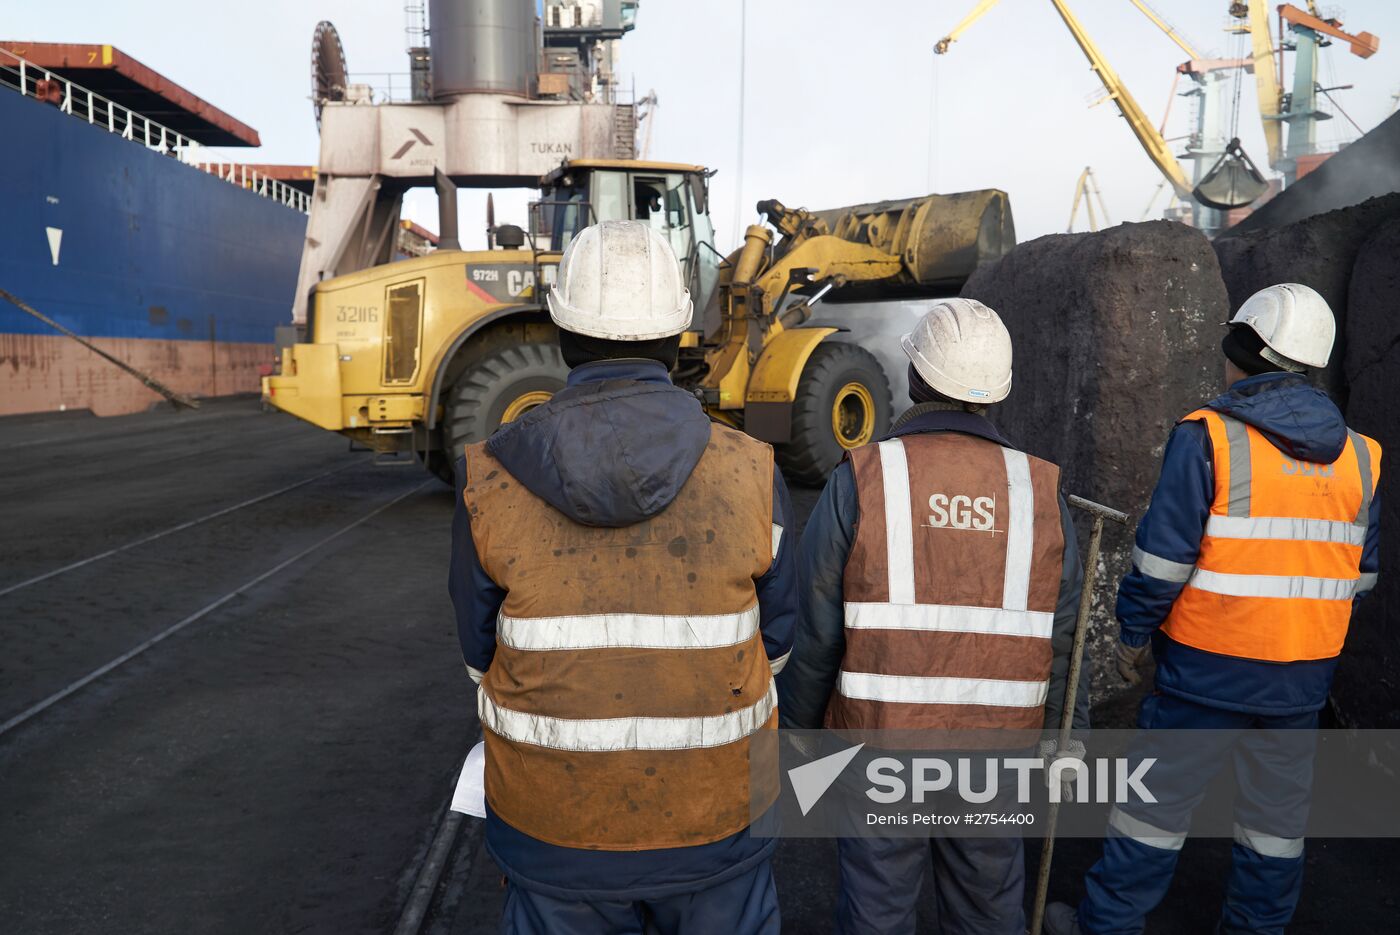 Coal from South Africa unloaded at Odessa port